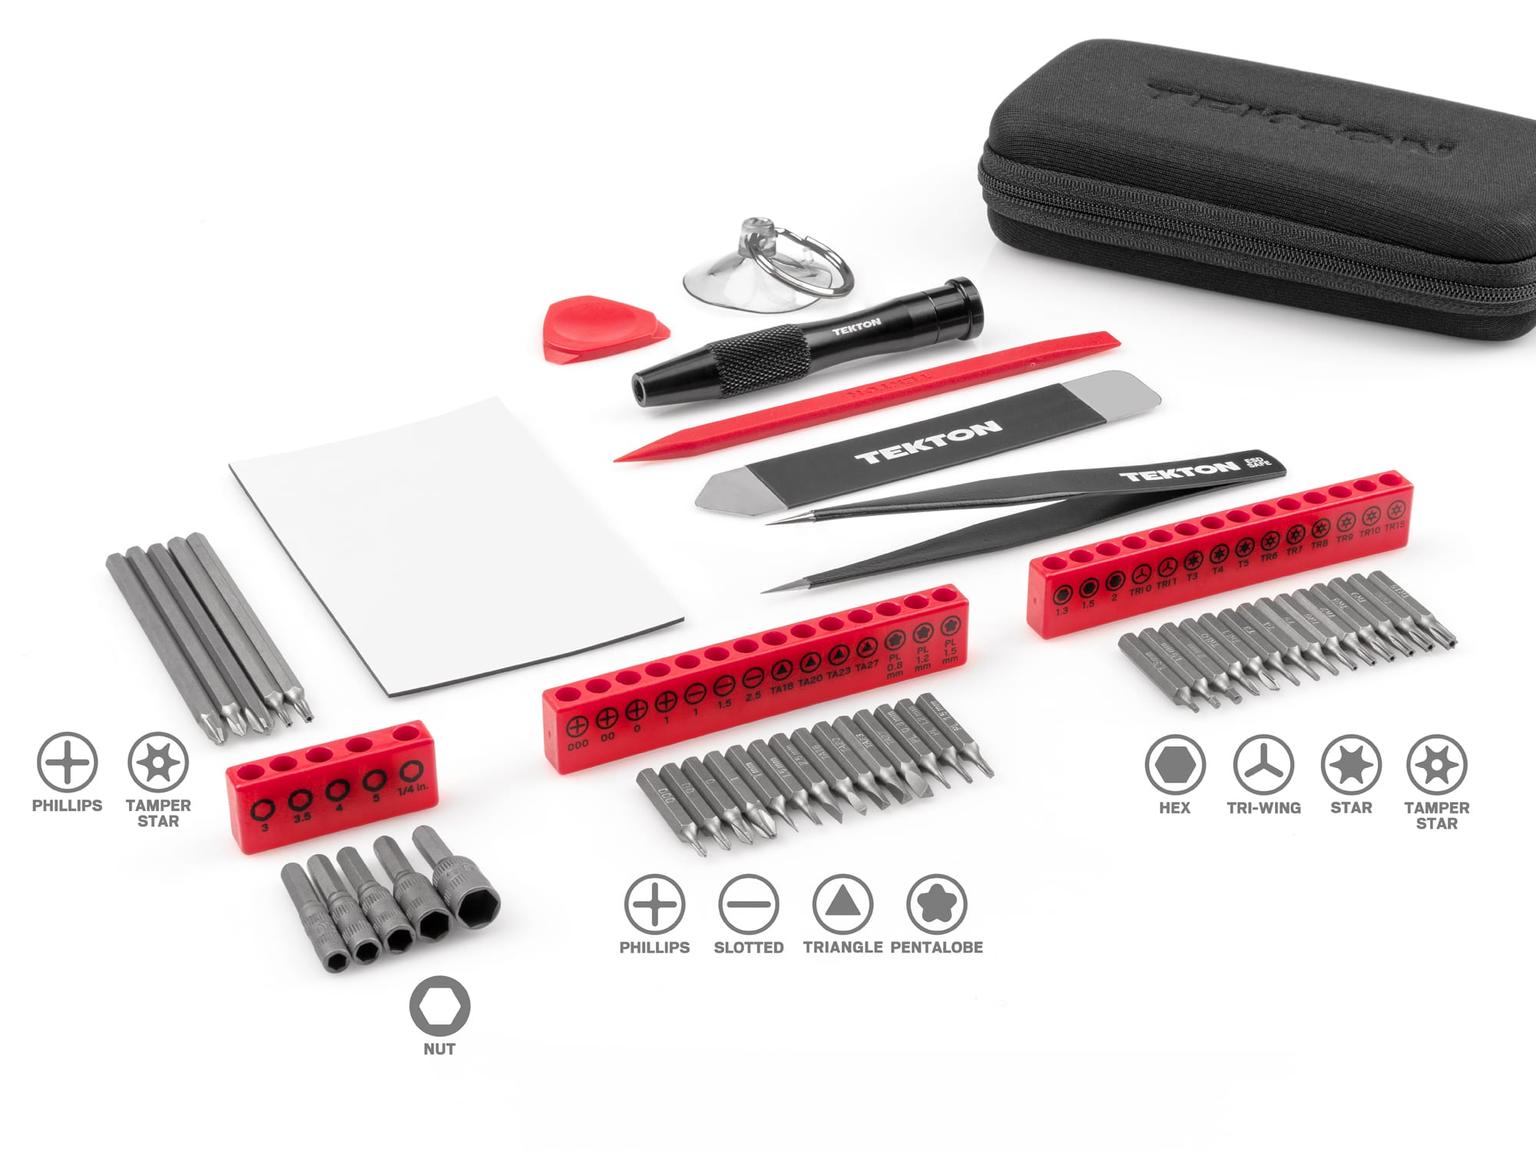 TEKTON DRV99003-T Everybit Tech Rescue Kit and 1/4 Inch Bit/Driver Set with Cases, 83-Piece